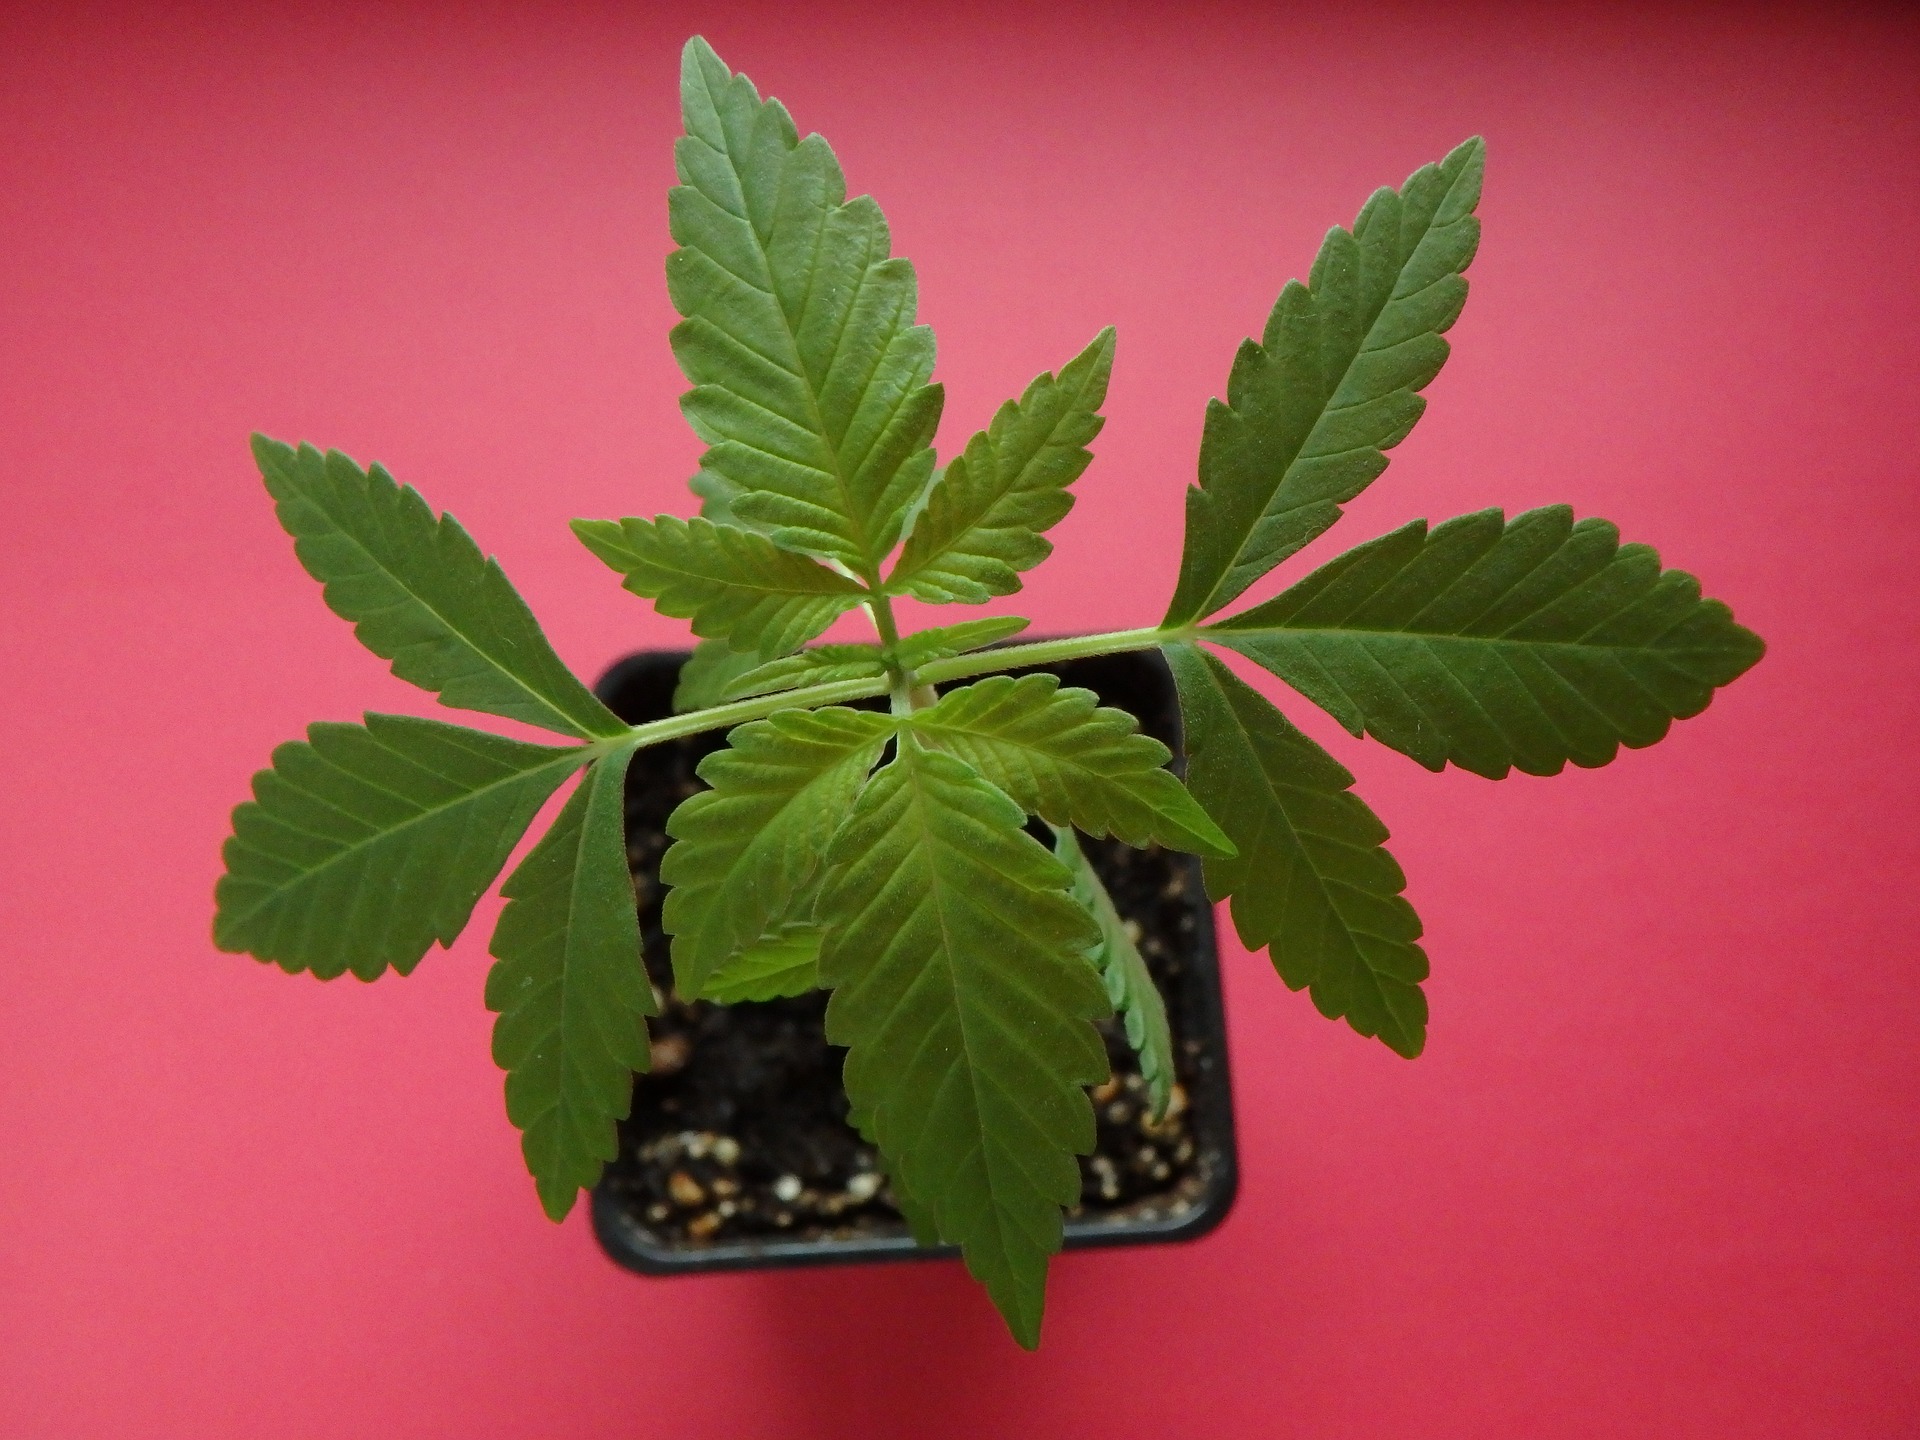 Overhead view of young cannabis plant on pink background